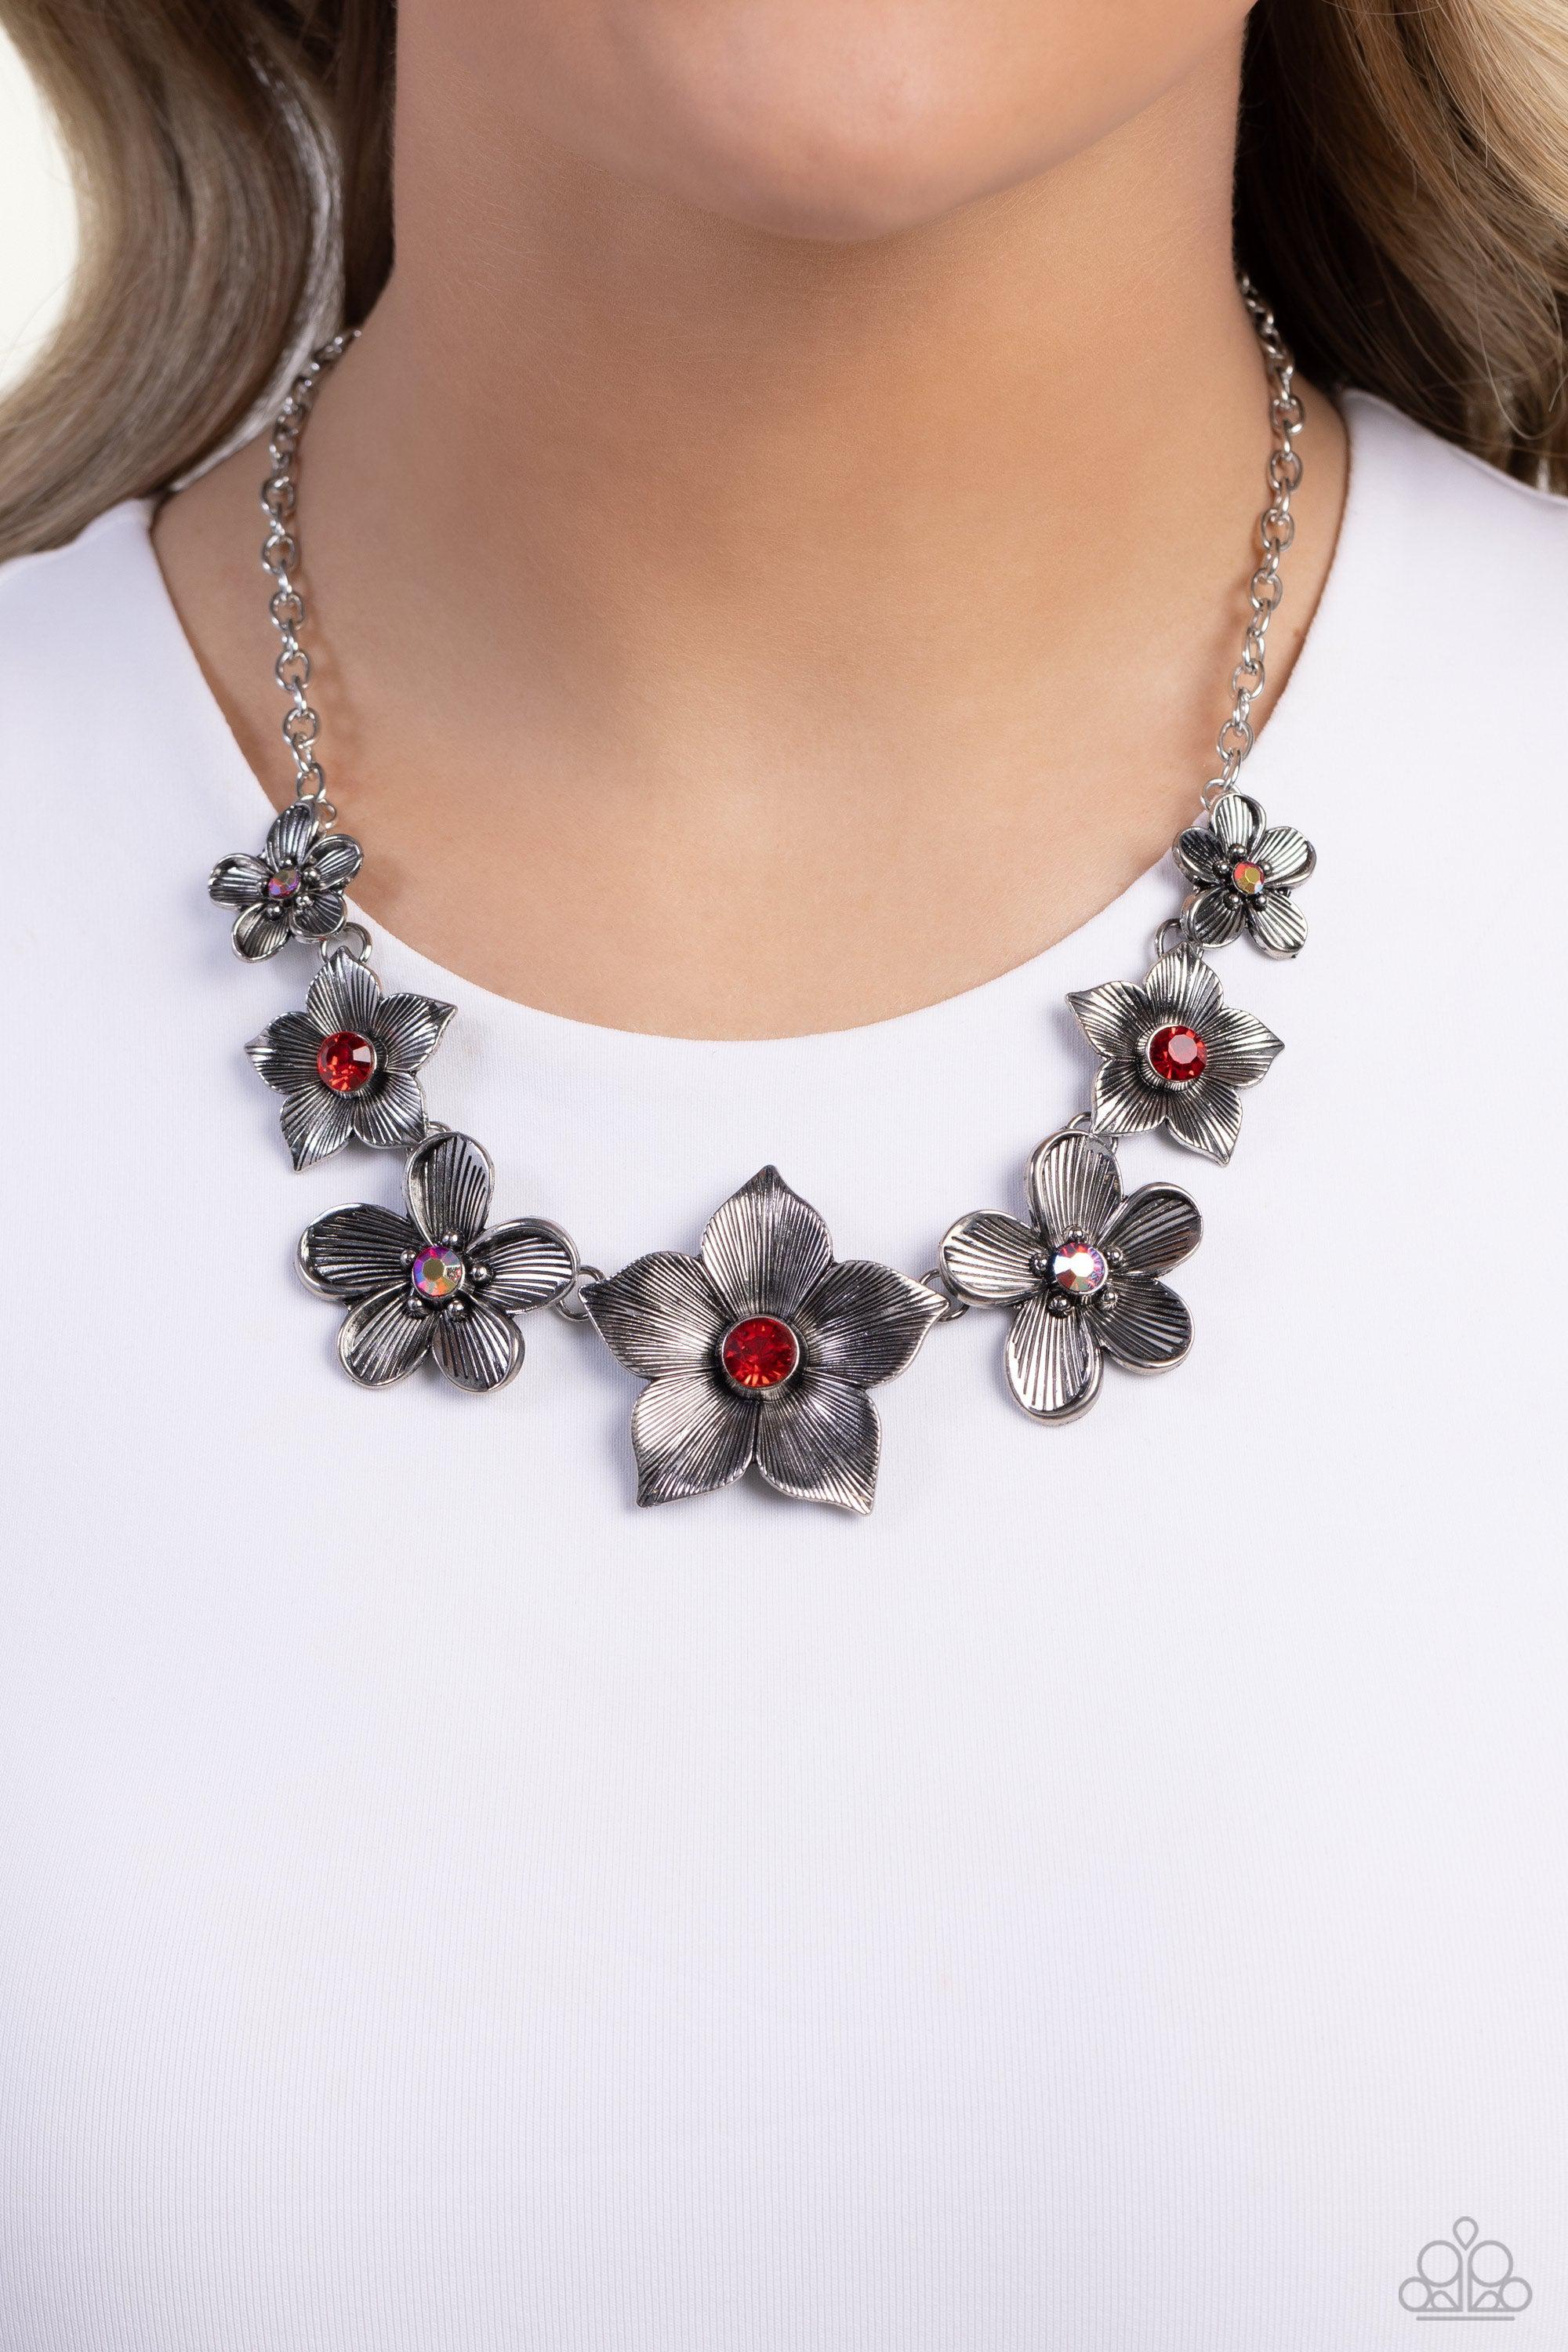 Free FLORAL Red Necklace - Paparazzi Accessories-on model - CarasShop.com - $5 Jewelry by Cara Jewels